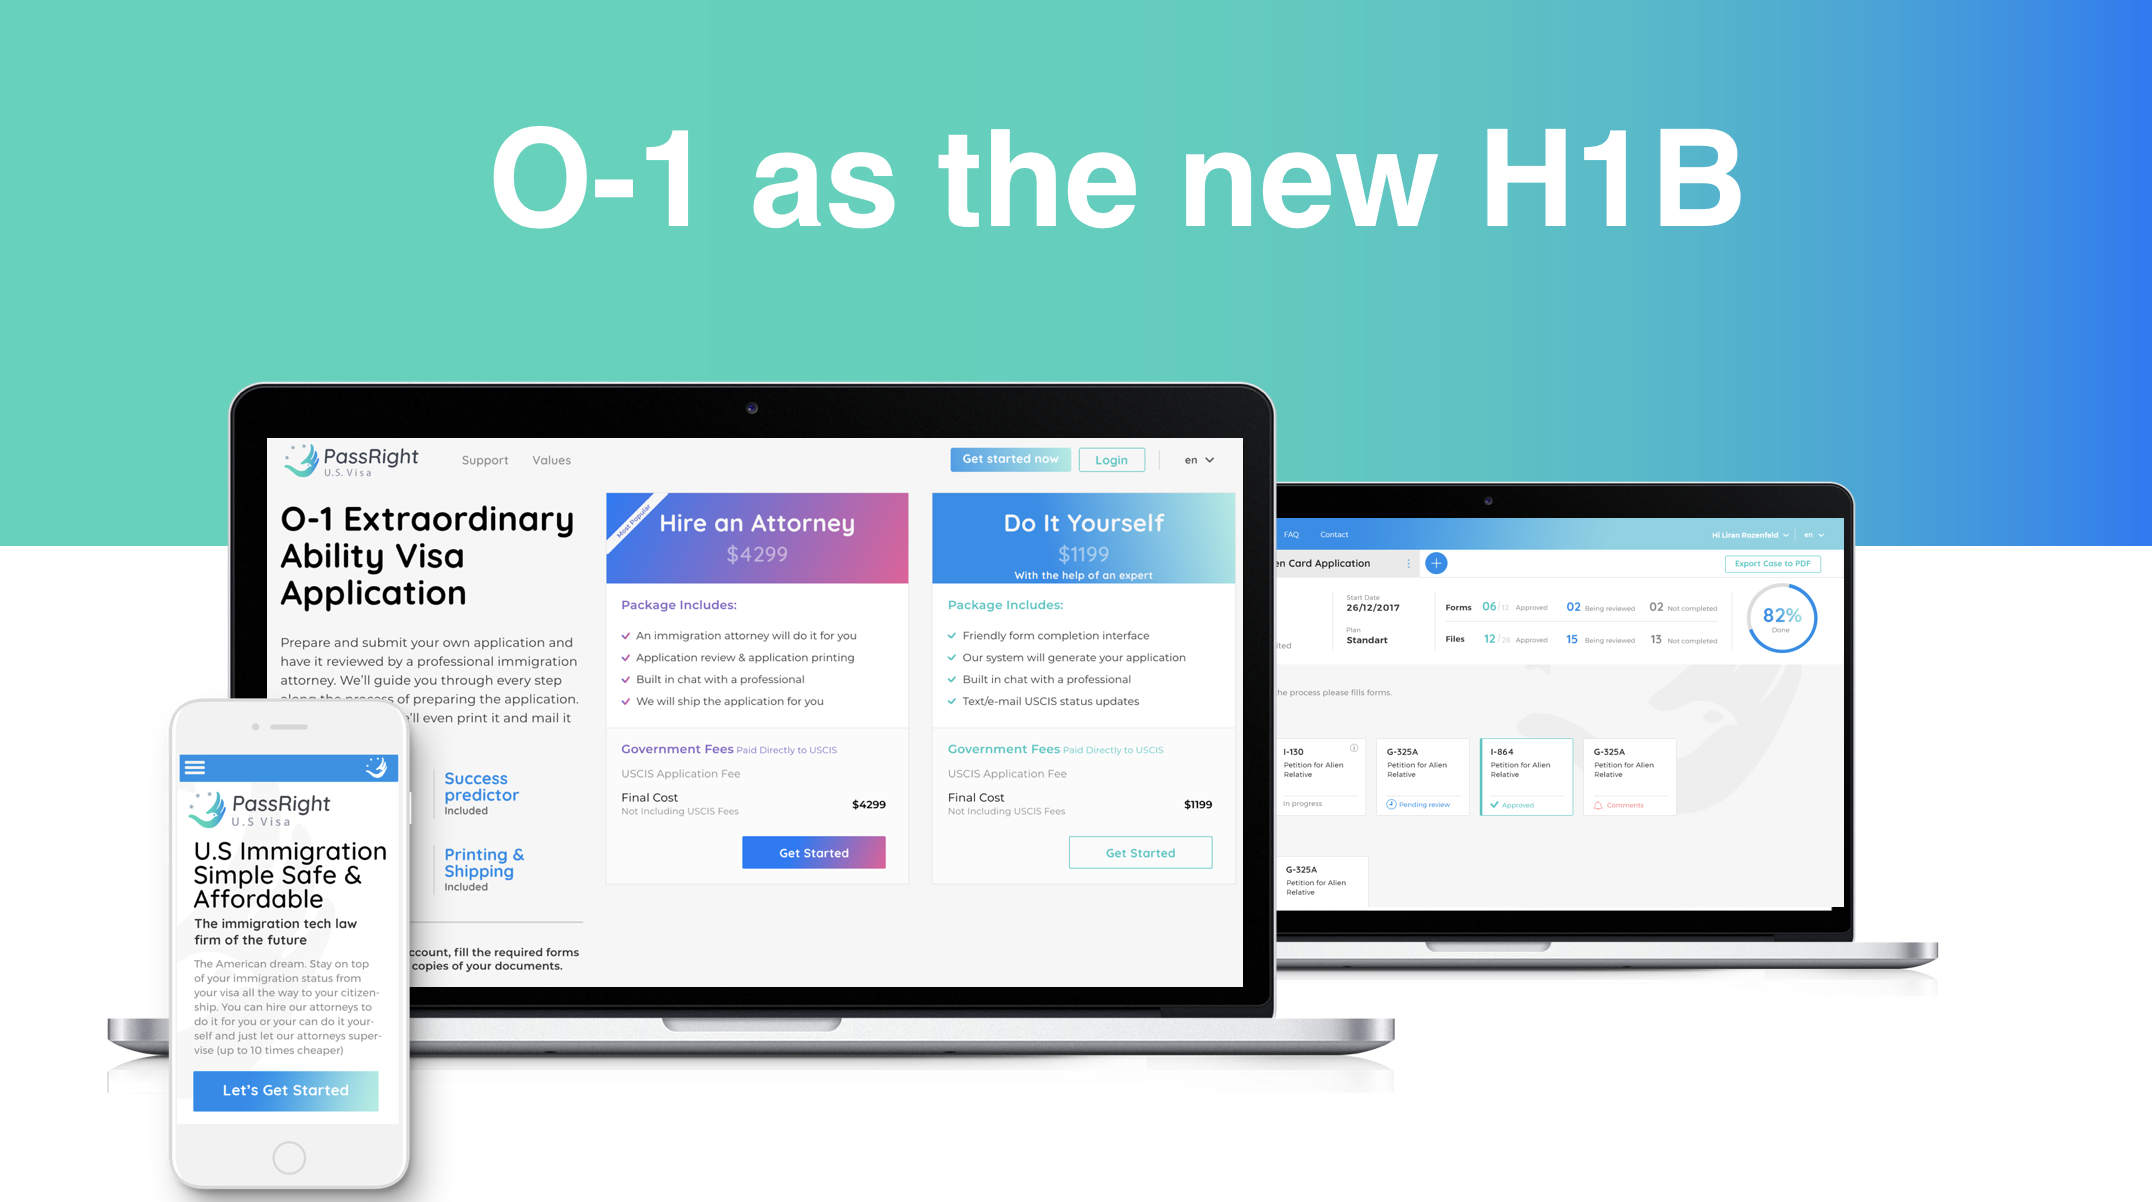 O-1 as the new H1b